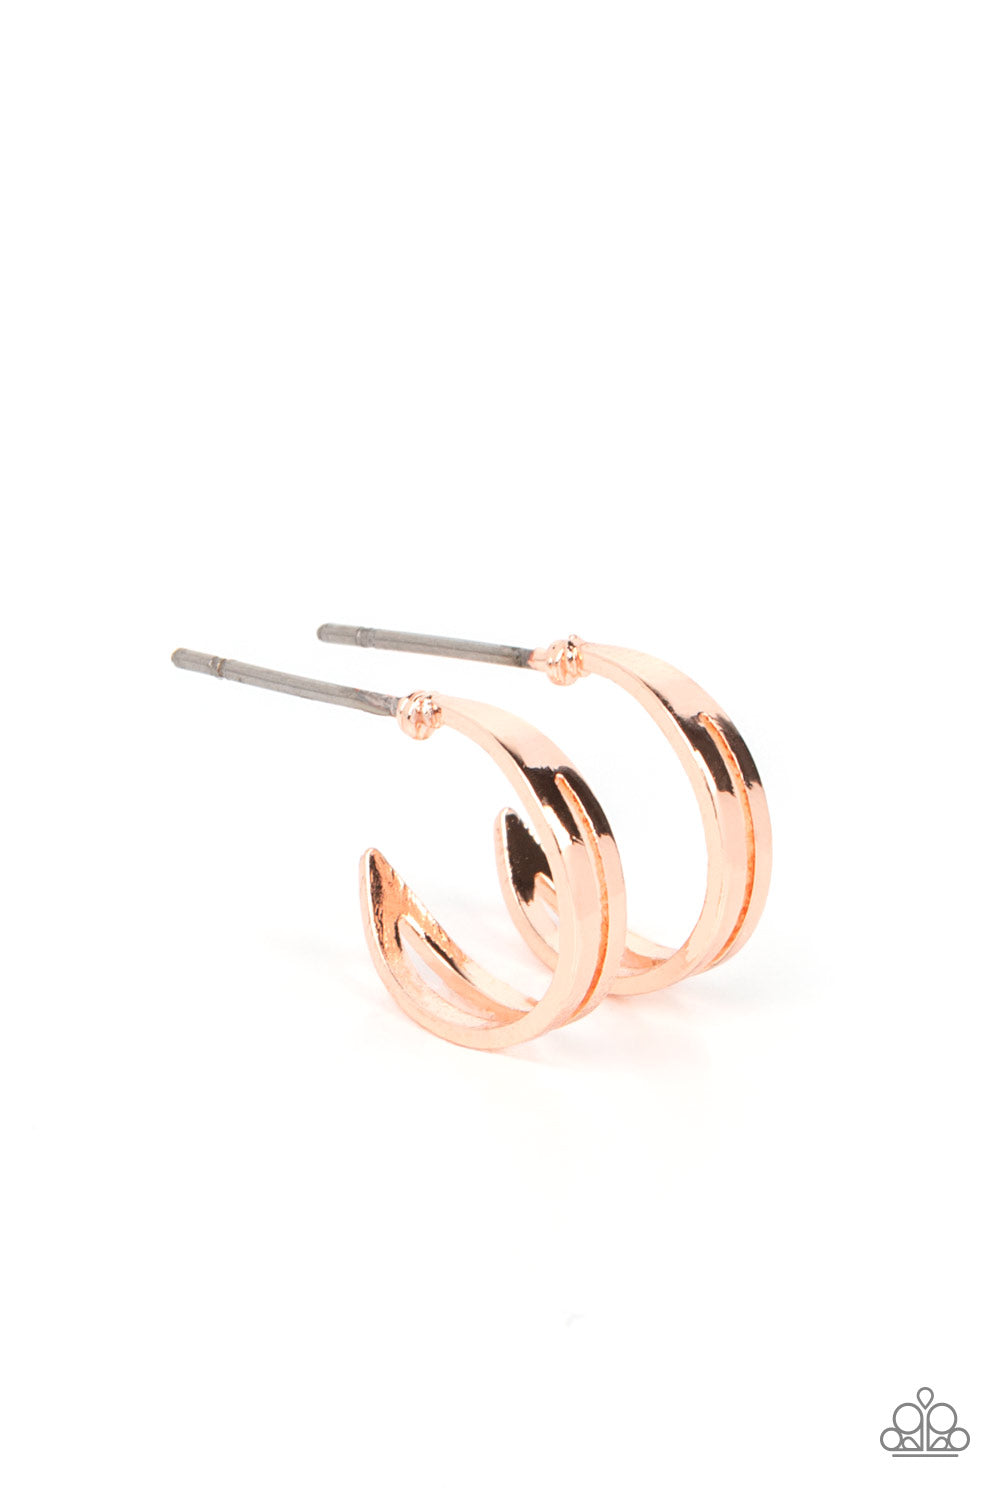 SMALLEST of Them All Rose Gold Hoop Earring - Paparazzi Accessories  Two flat rose gold bars delicately curve into a single hoop, creating a dainty layered look. Earring attaches to a standard post fitting. Hoop measures approximately 1/2" in diameter.  Sold as one pair of hoop earrings.